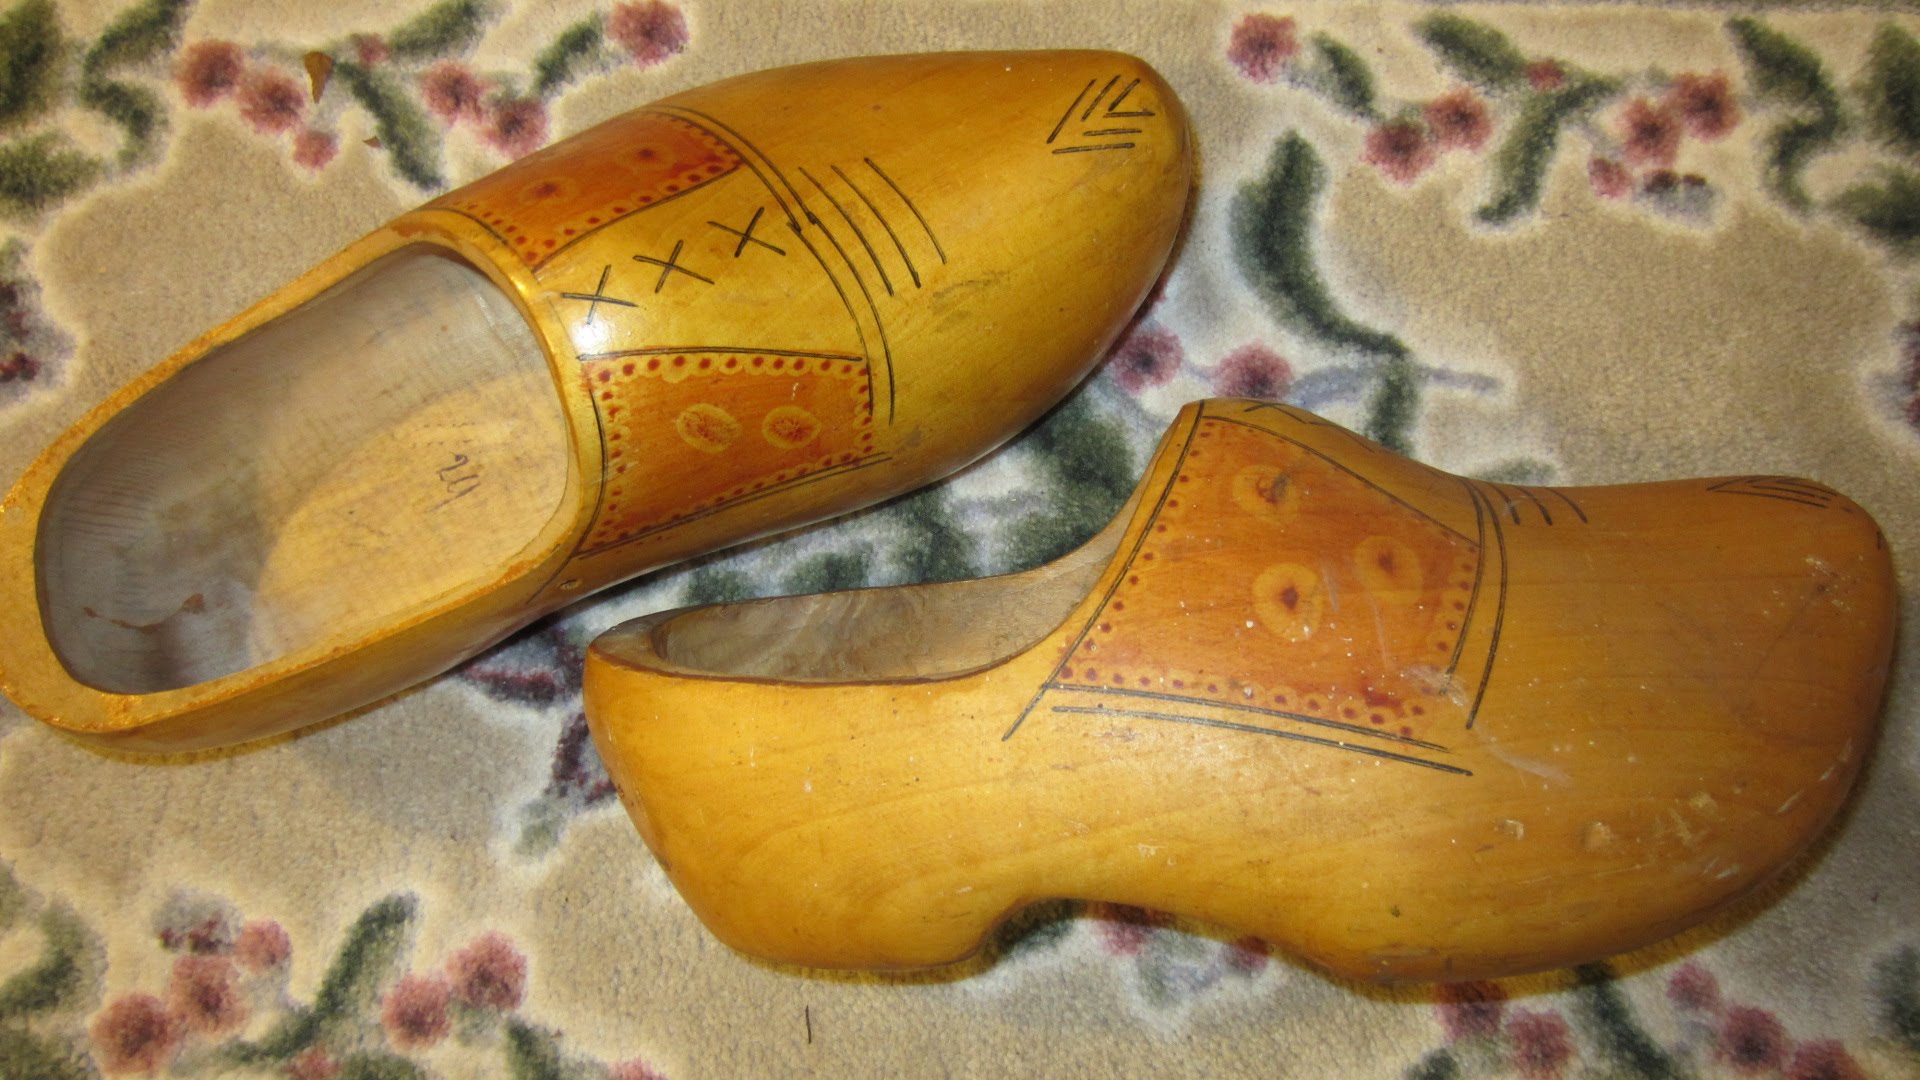 Wooden Shoes. Running Gear's Future? Woka One Ones - YouTube